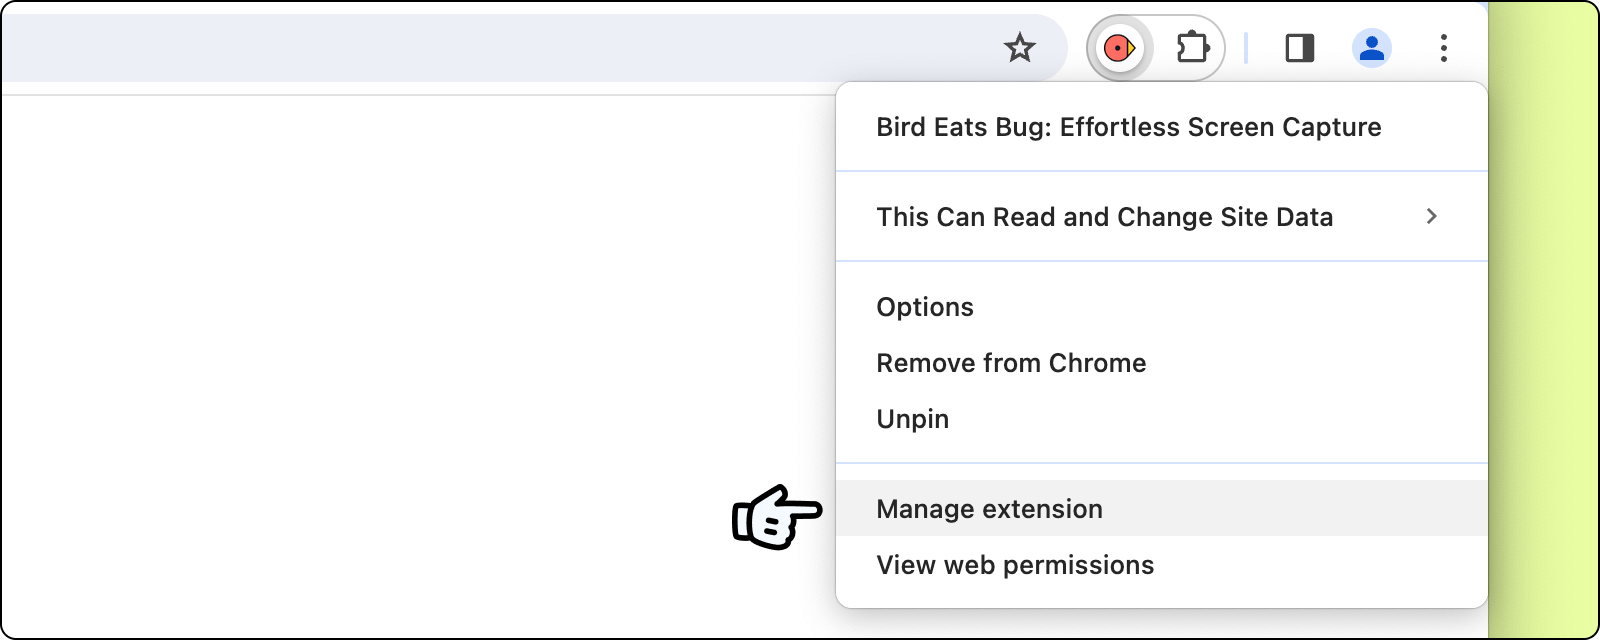 Manage extension